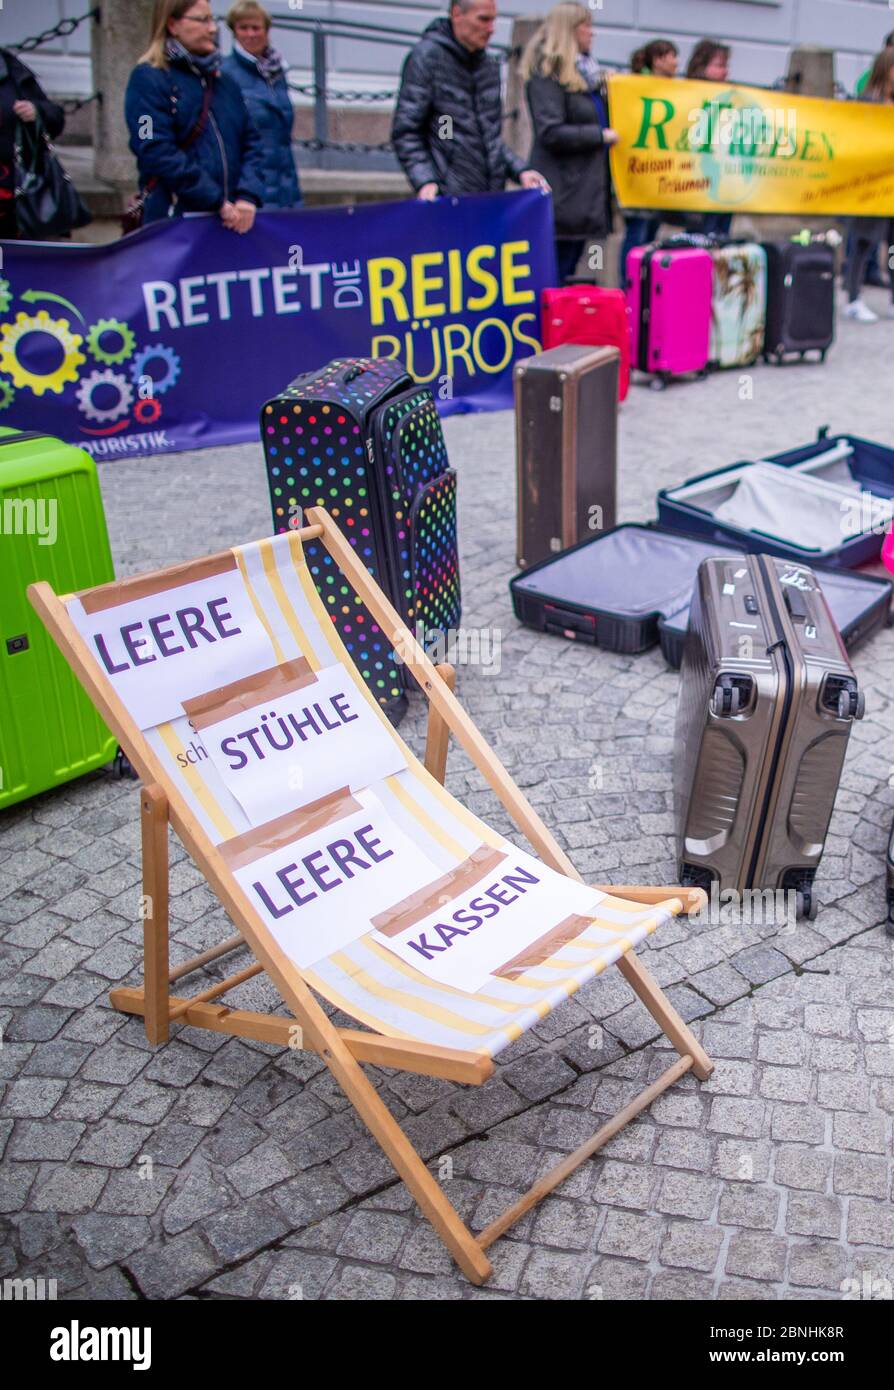 Schwerin, Germany. 13th May, 2020. Empty deckchairs are used by employees of travel agencies and tourism businesses to demonstrate in front of the state chancellery for an exit strategy from the Corona crisis. From 25 May onwards, the coach industry may offer tours again, but the conditions are still completely unclear. Credit: Jens Büttner/dpa-Zentralbild/ZB/dpa/Alamy Live News Stock Photo